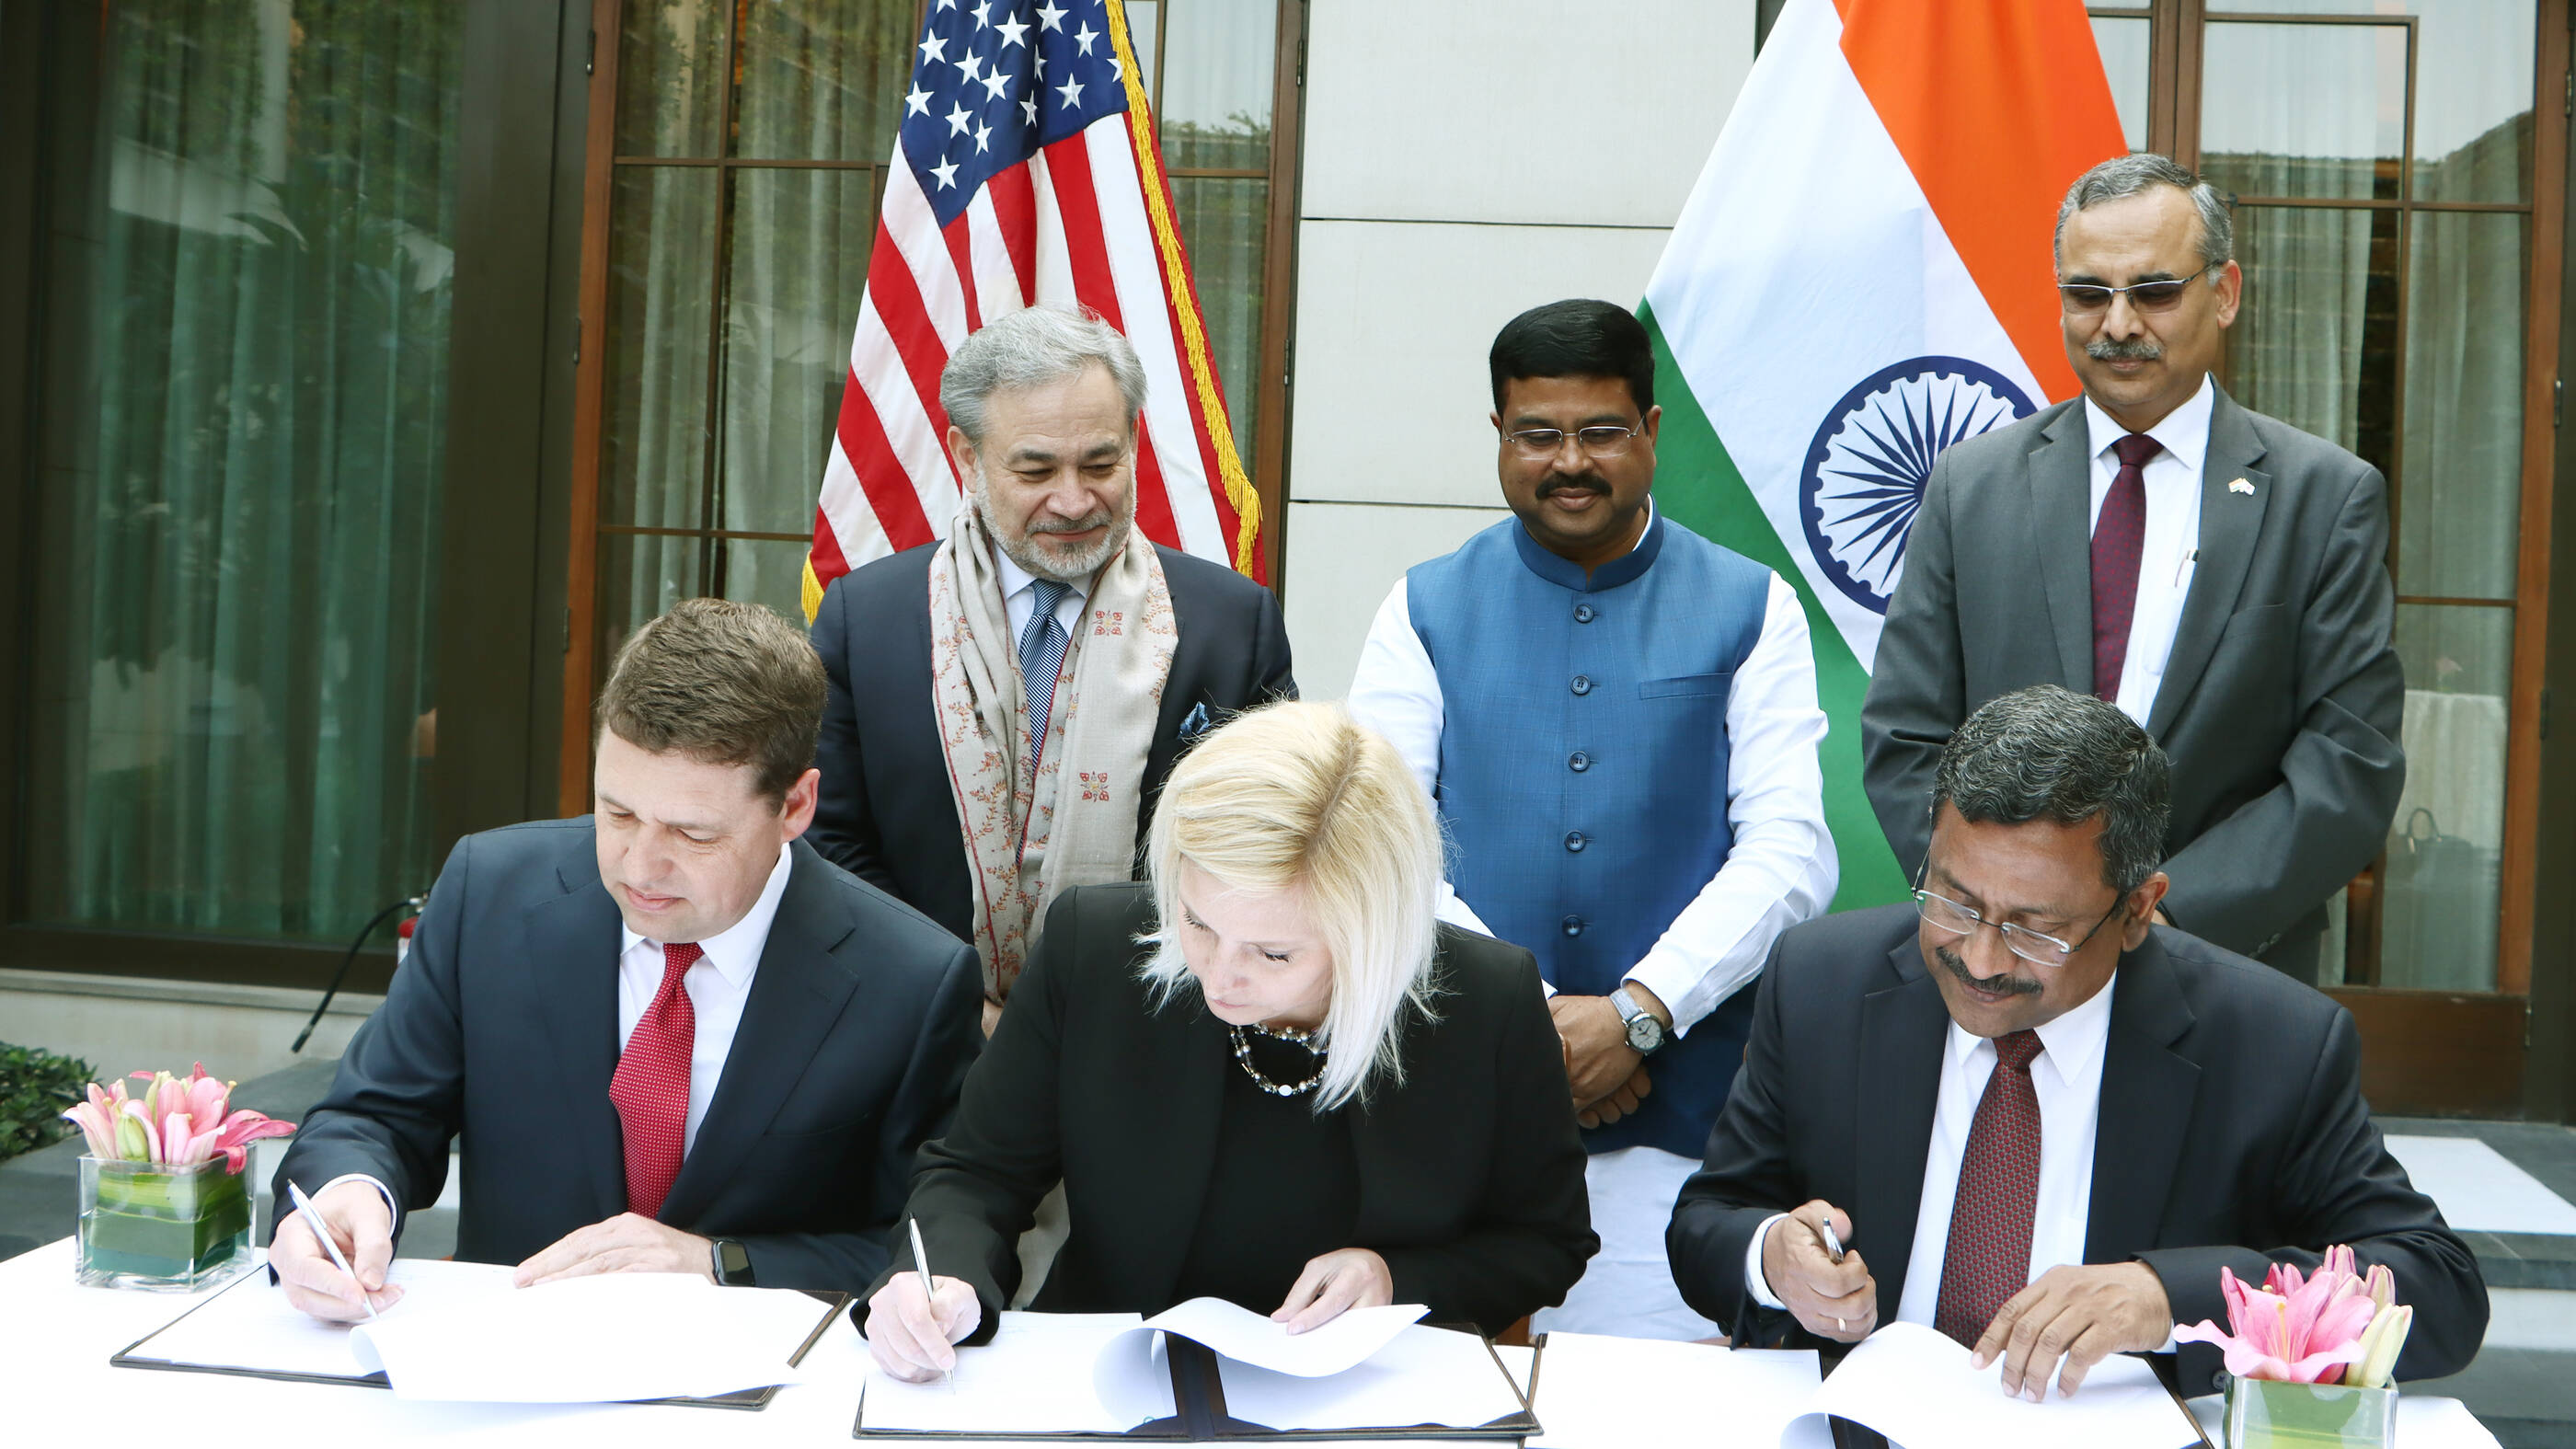 Seated (left to right): Alex Volkov, Chairman, ExxonMobil LNG Market Development Inc; Jillian Evanko, CEO, Chart Industries, Inc; GK Satish, Director (P&BD), IndianOil
Standing (left to right): US Energy Secretary Dan Brouillette, India’s Minister of Petroleum and Gas Dharmendra Pradhan and IndianOil Chairman Sanjiv Singh